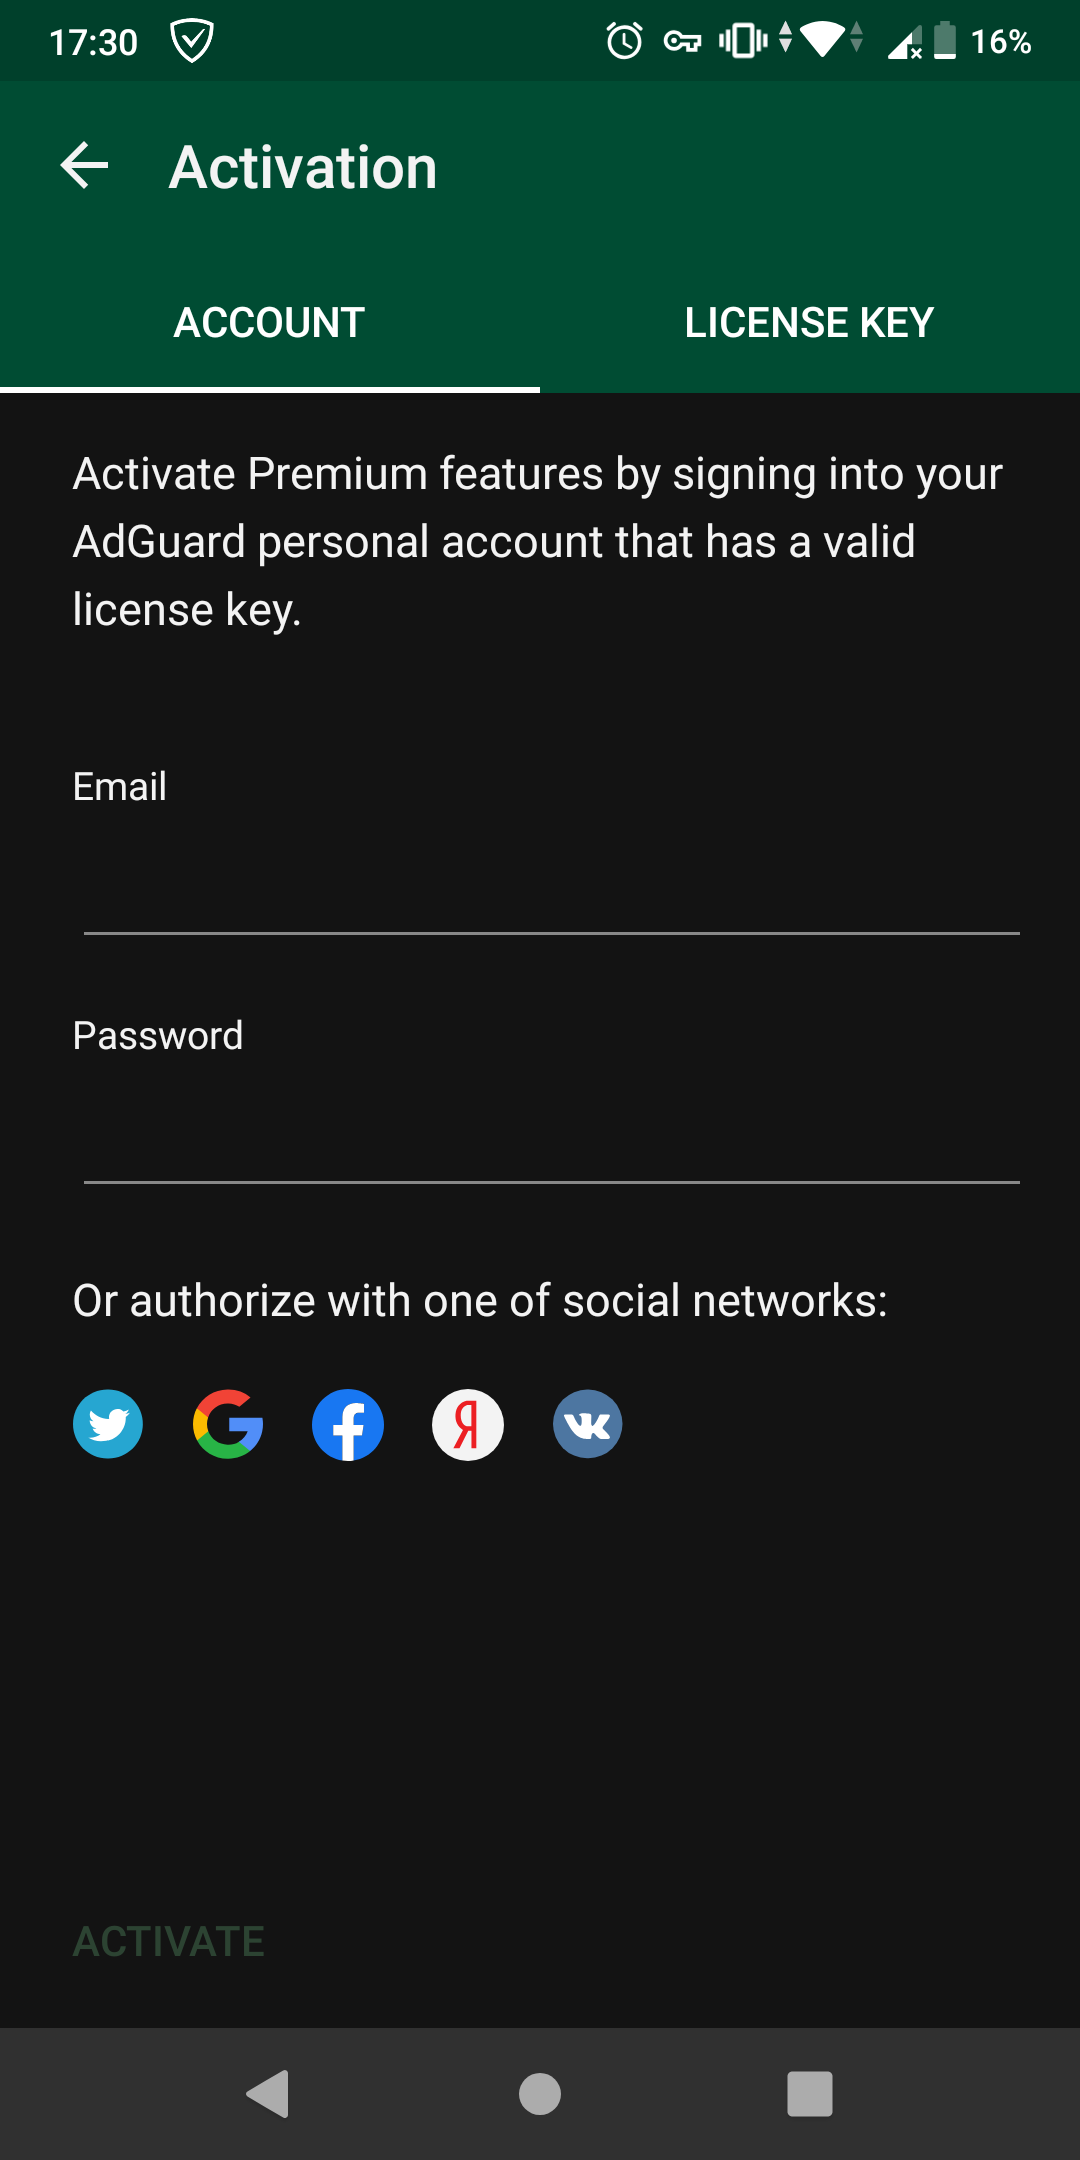 Log in to activate *mobile